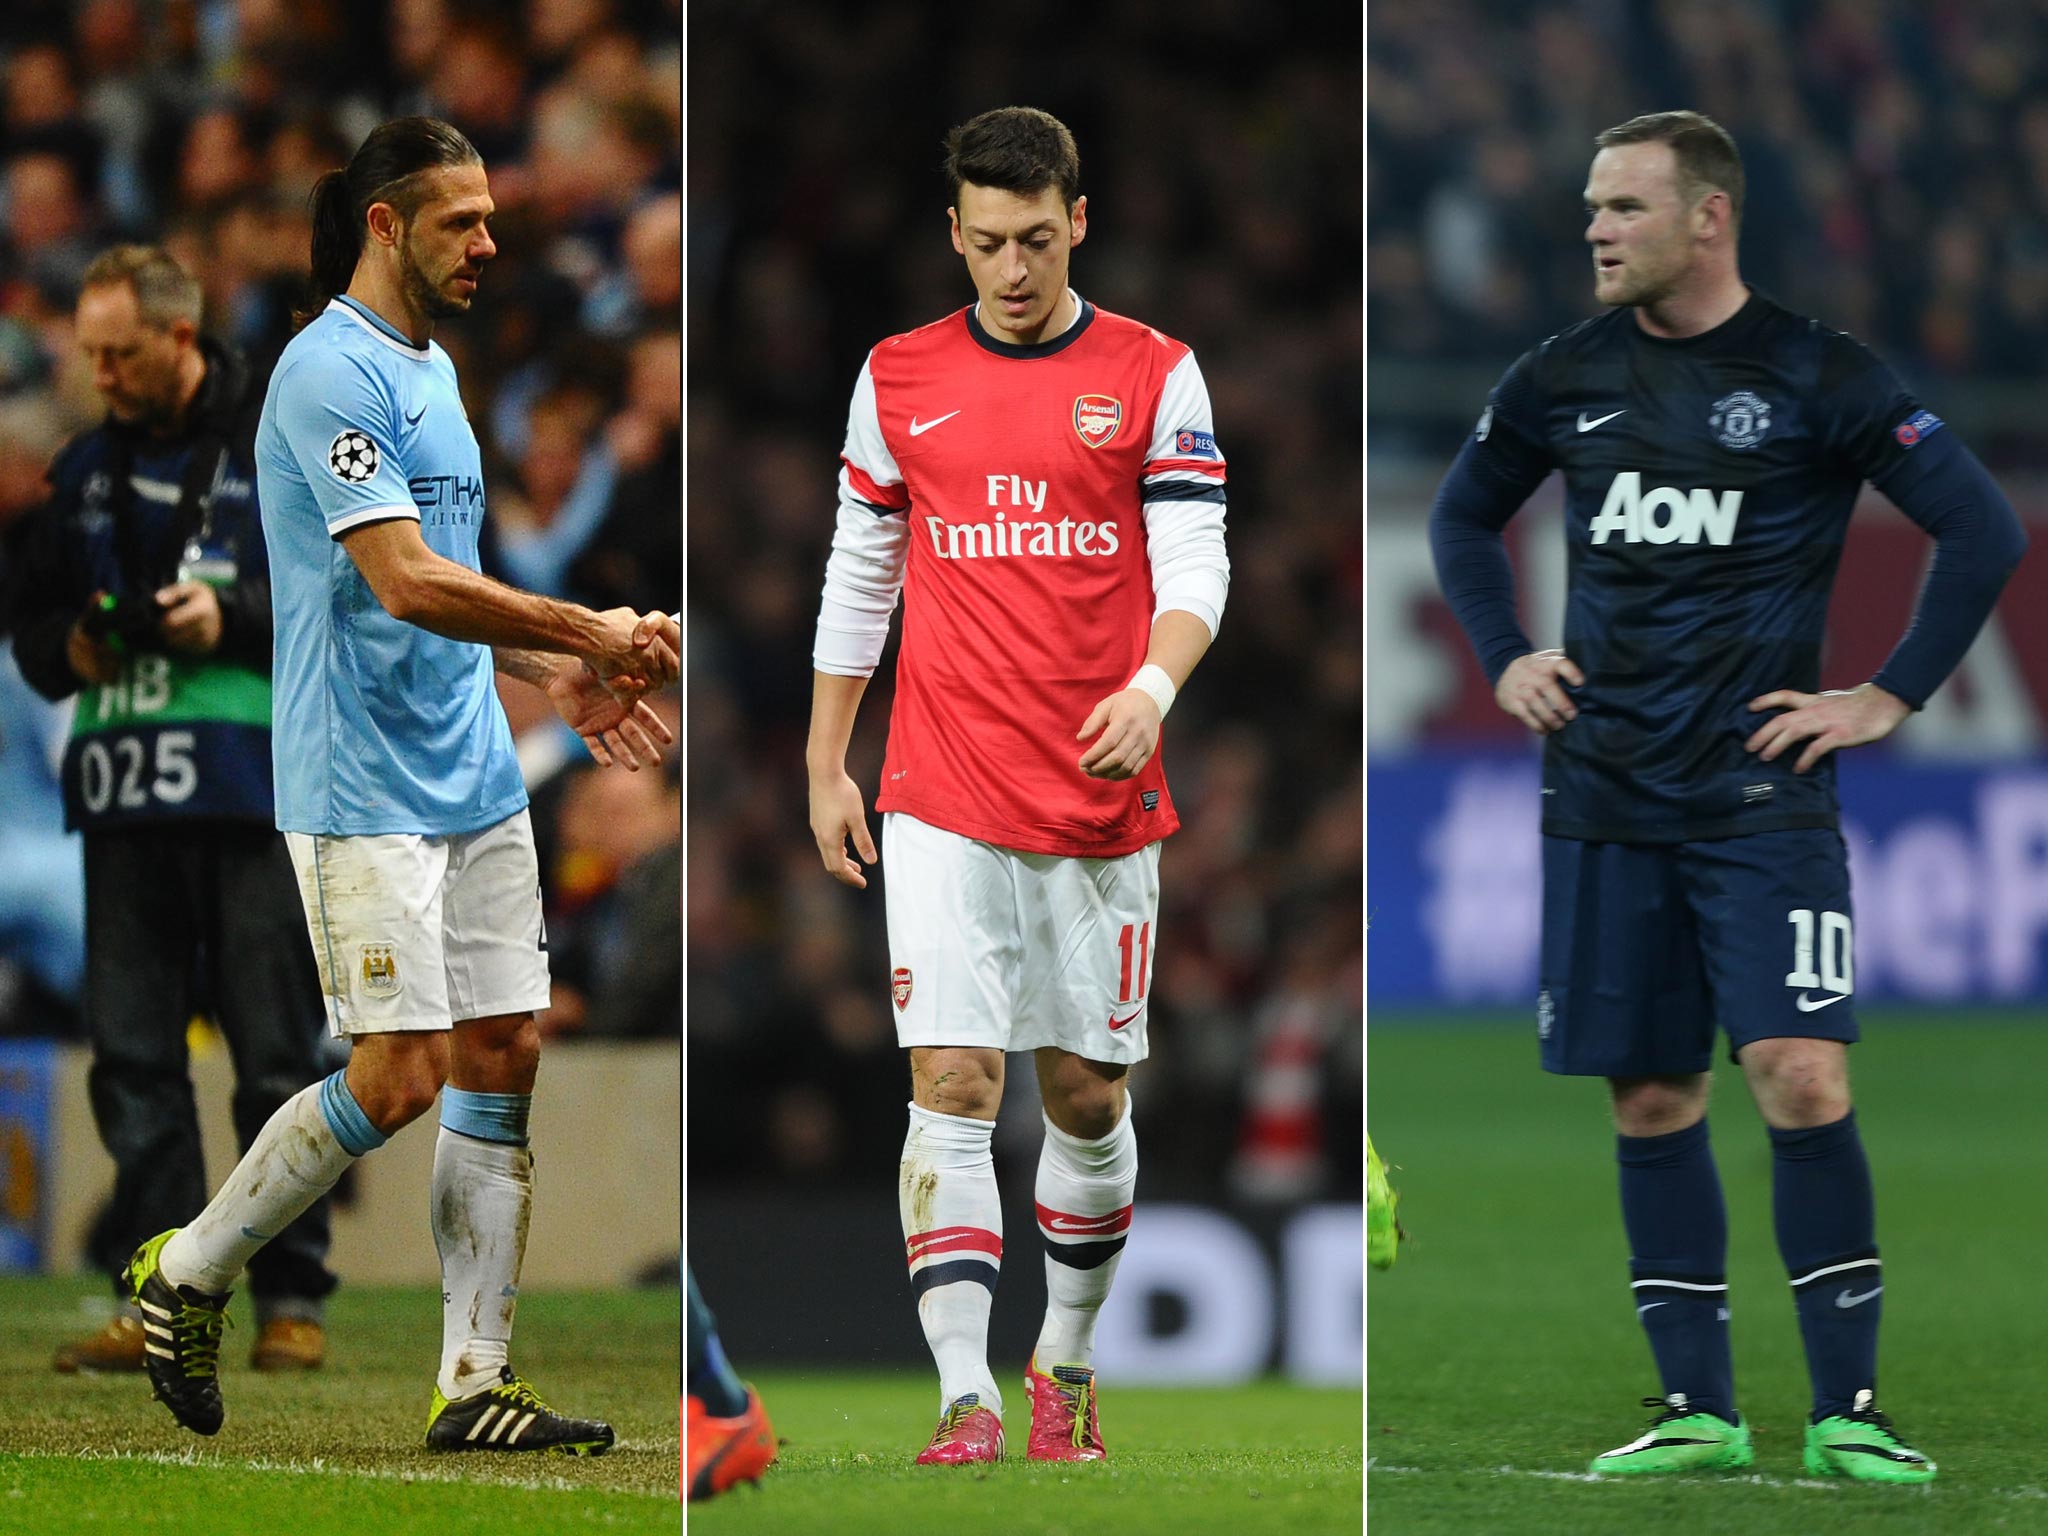 Martin Demichelis is sent-off for Manchester City, Mesut Ozil misses a penalty for Arsenal, and Wayne Rooney looks dejected after Manchester United lose to Olympiakos